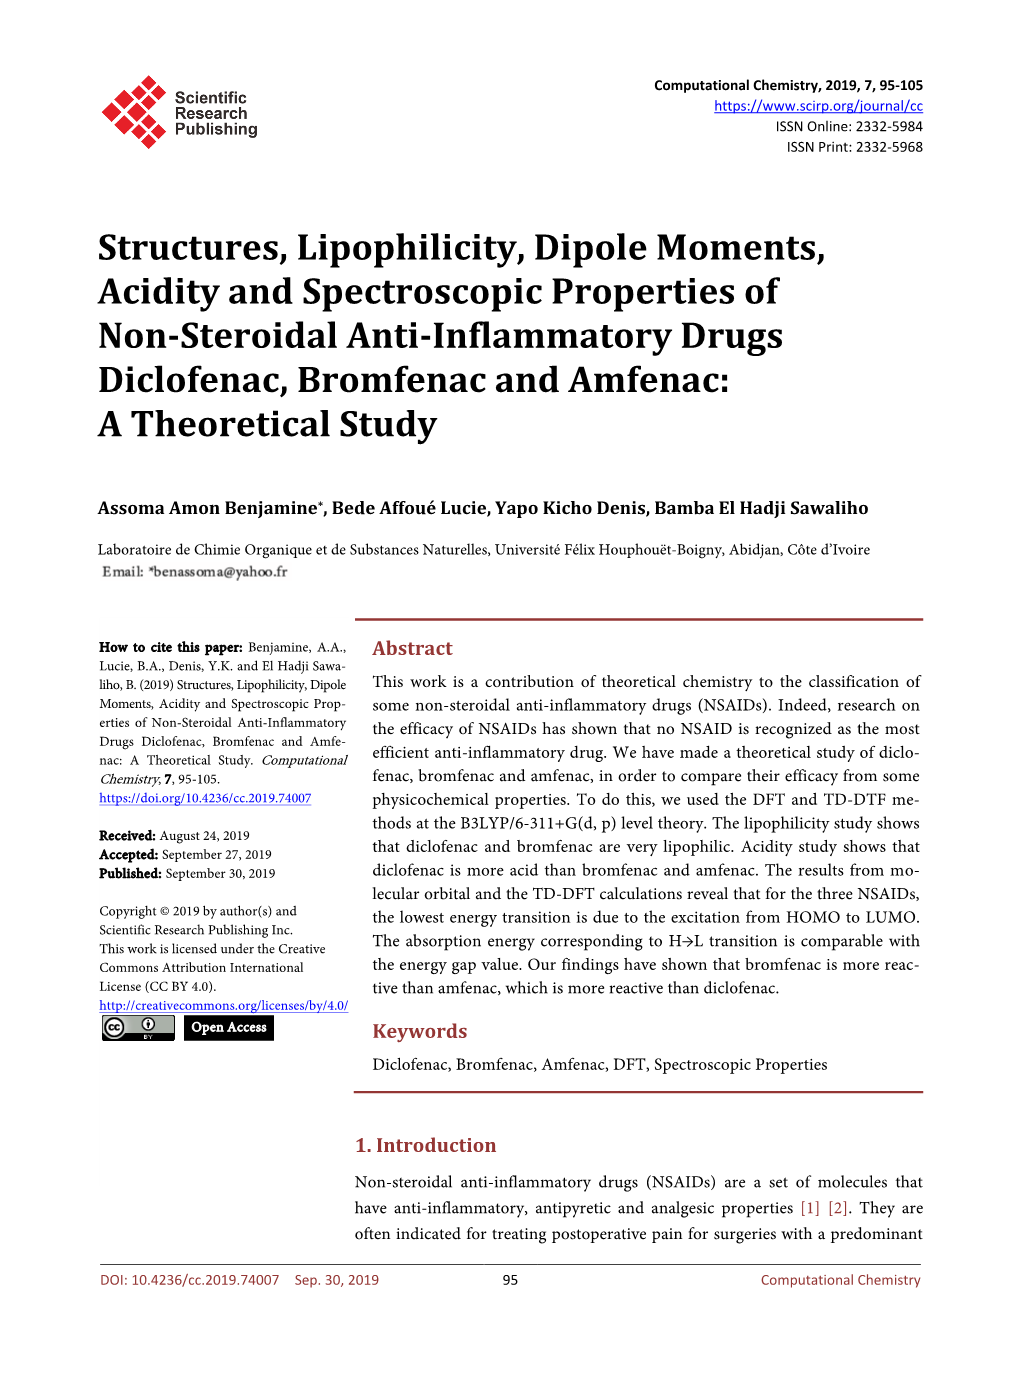 Structures, Lipophilicity, Dipole Moments, Acidity And